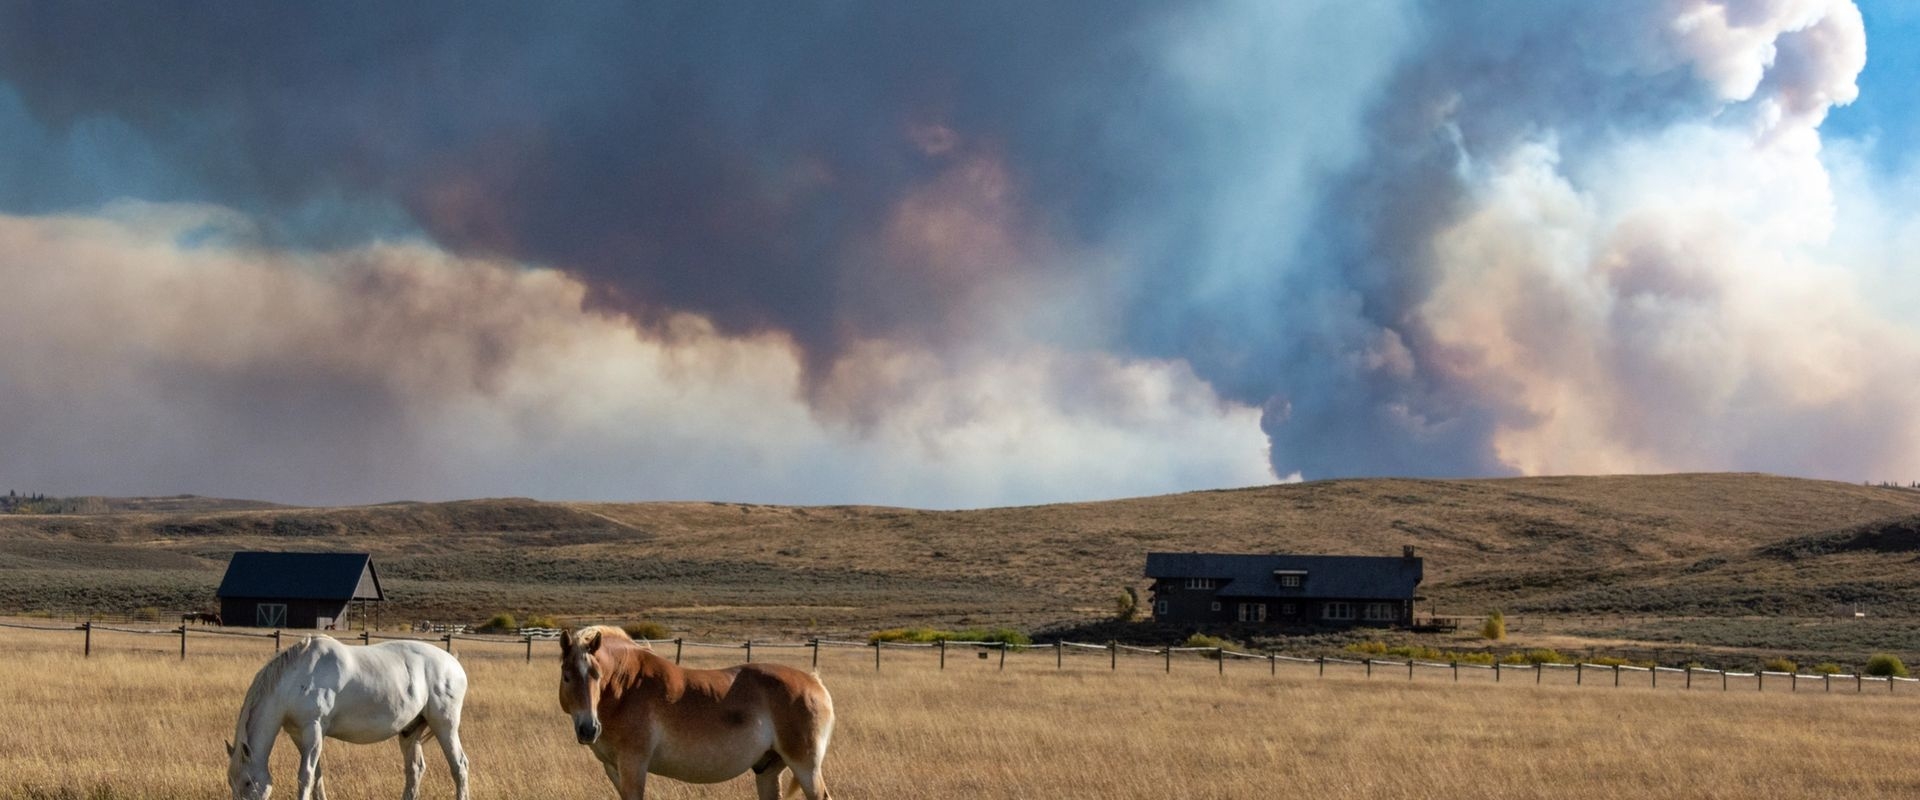 Horses eating dry grass in a pasture with smoke billowing from the horizon.